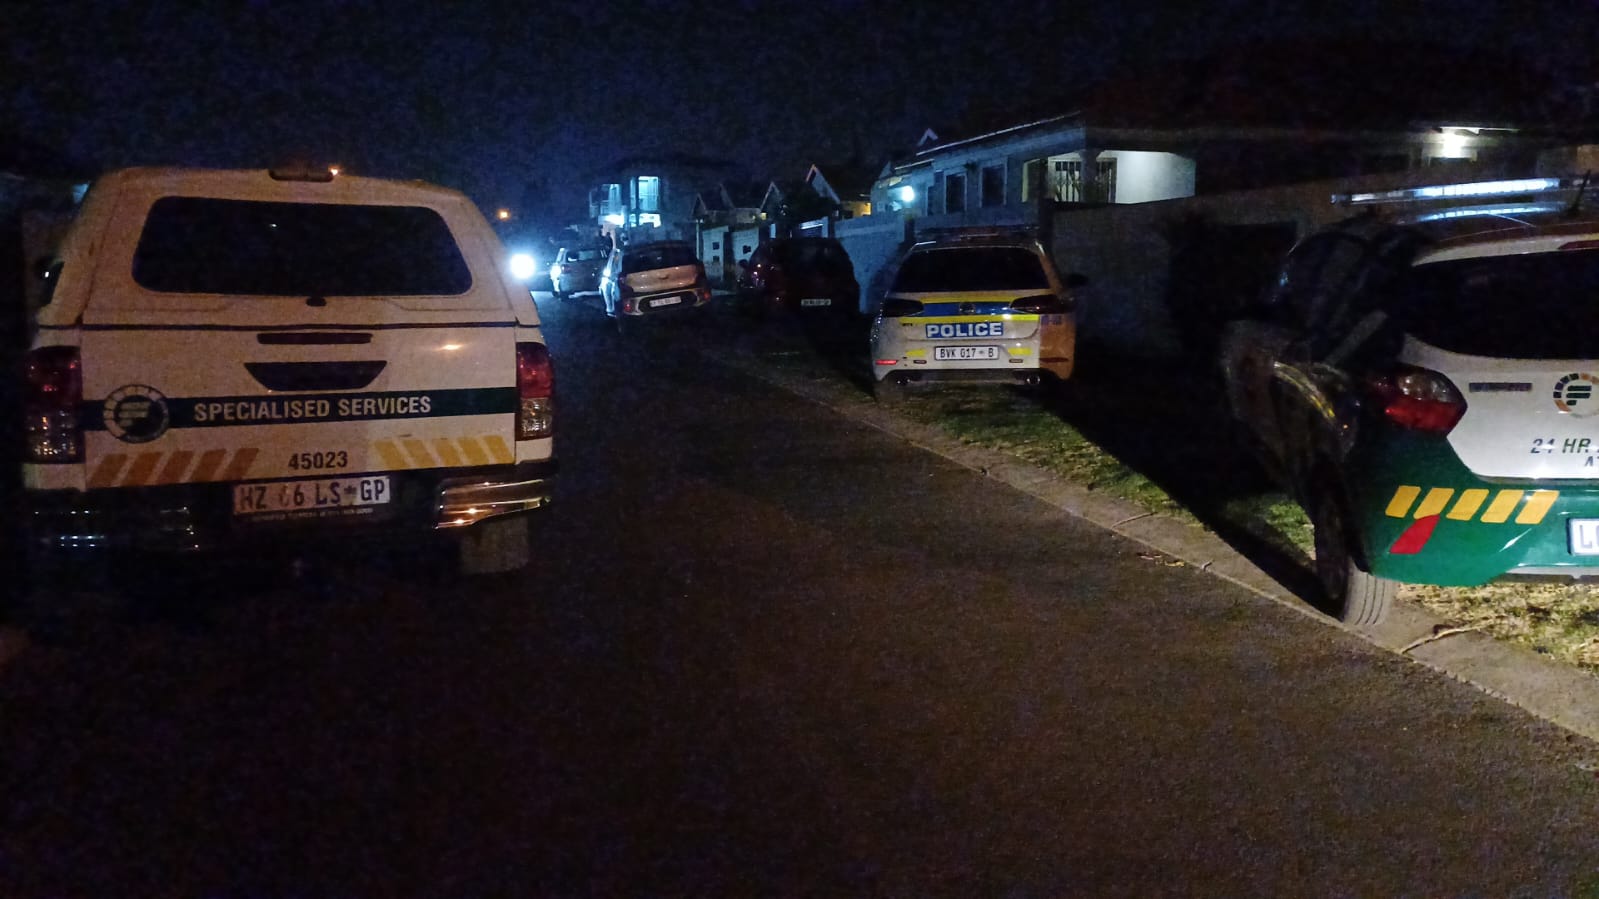 Fidelity ADT JHB South team responded to a hijacking and kidnapping incident in Kiblerpark